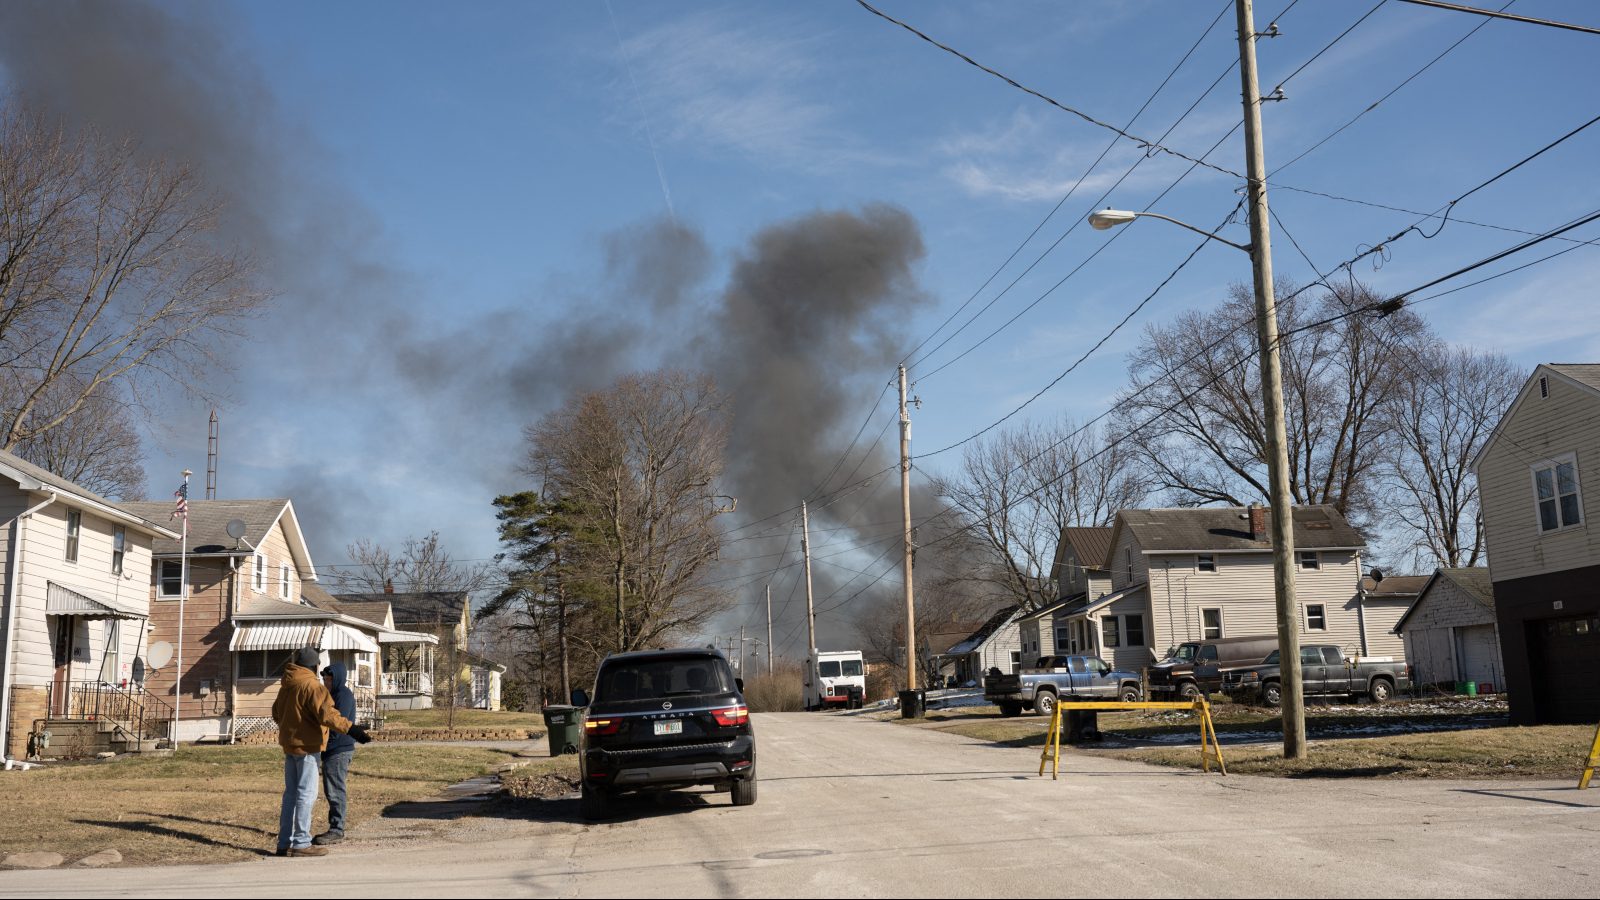 A black smoke cloud can be seen in the distance on a sunny day. The focus shows a residential street with cars, two-story houses, powerlines, and trees without leaves.